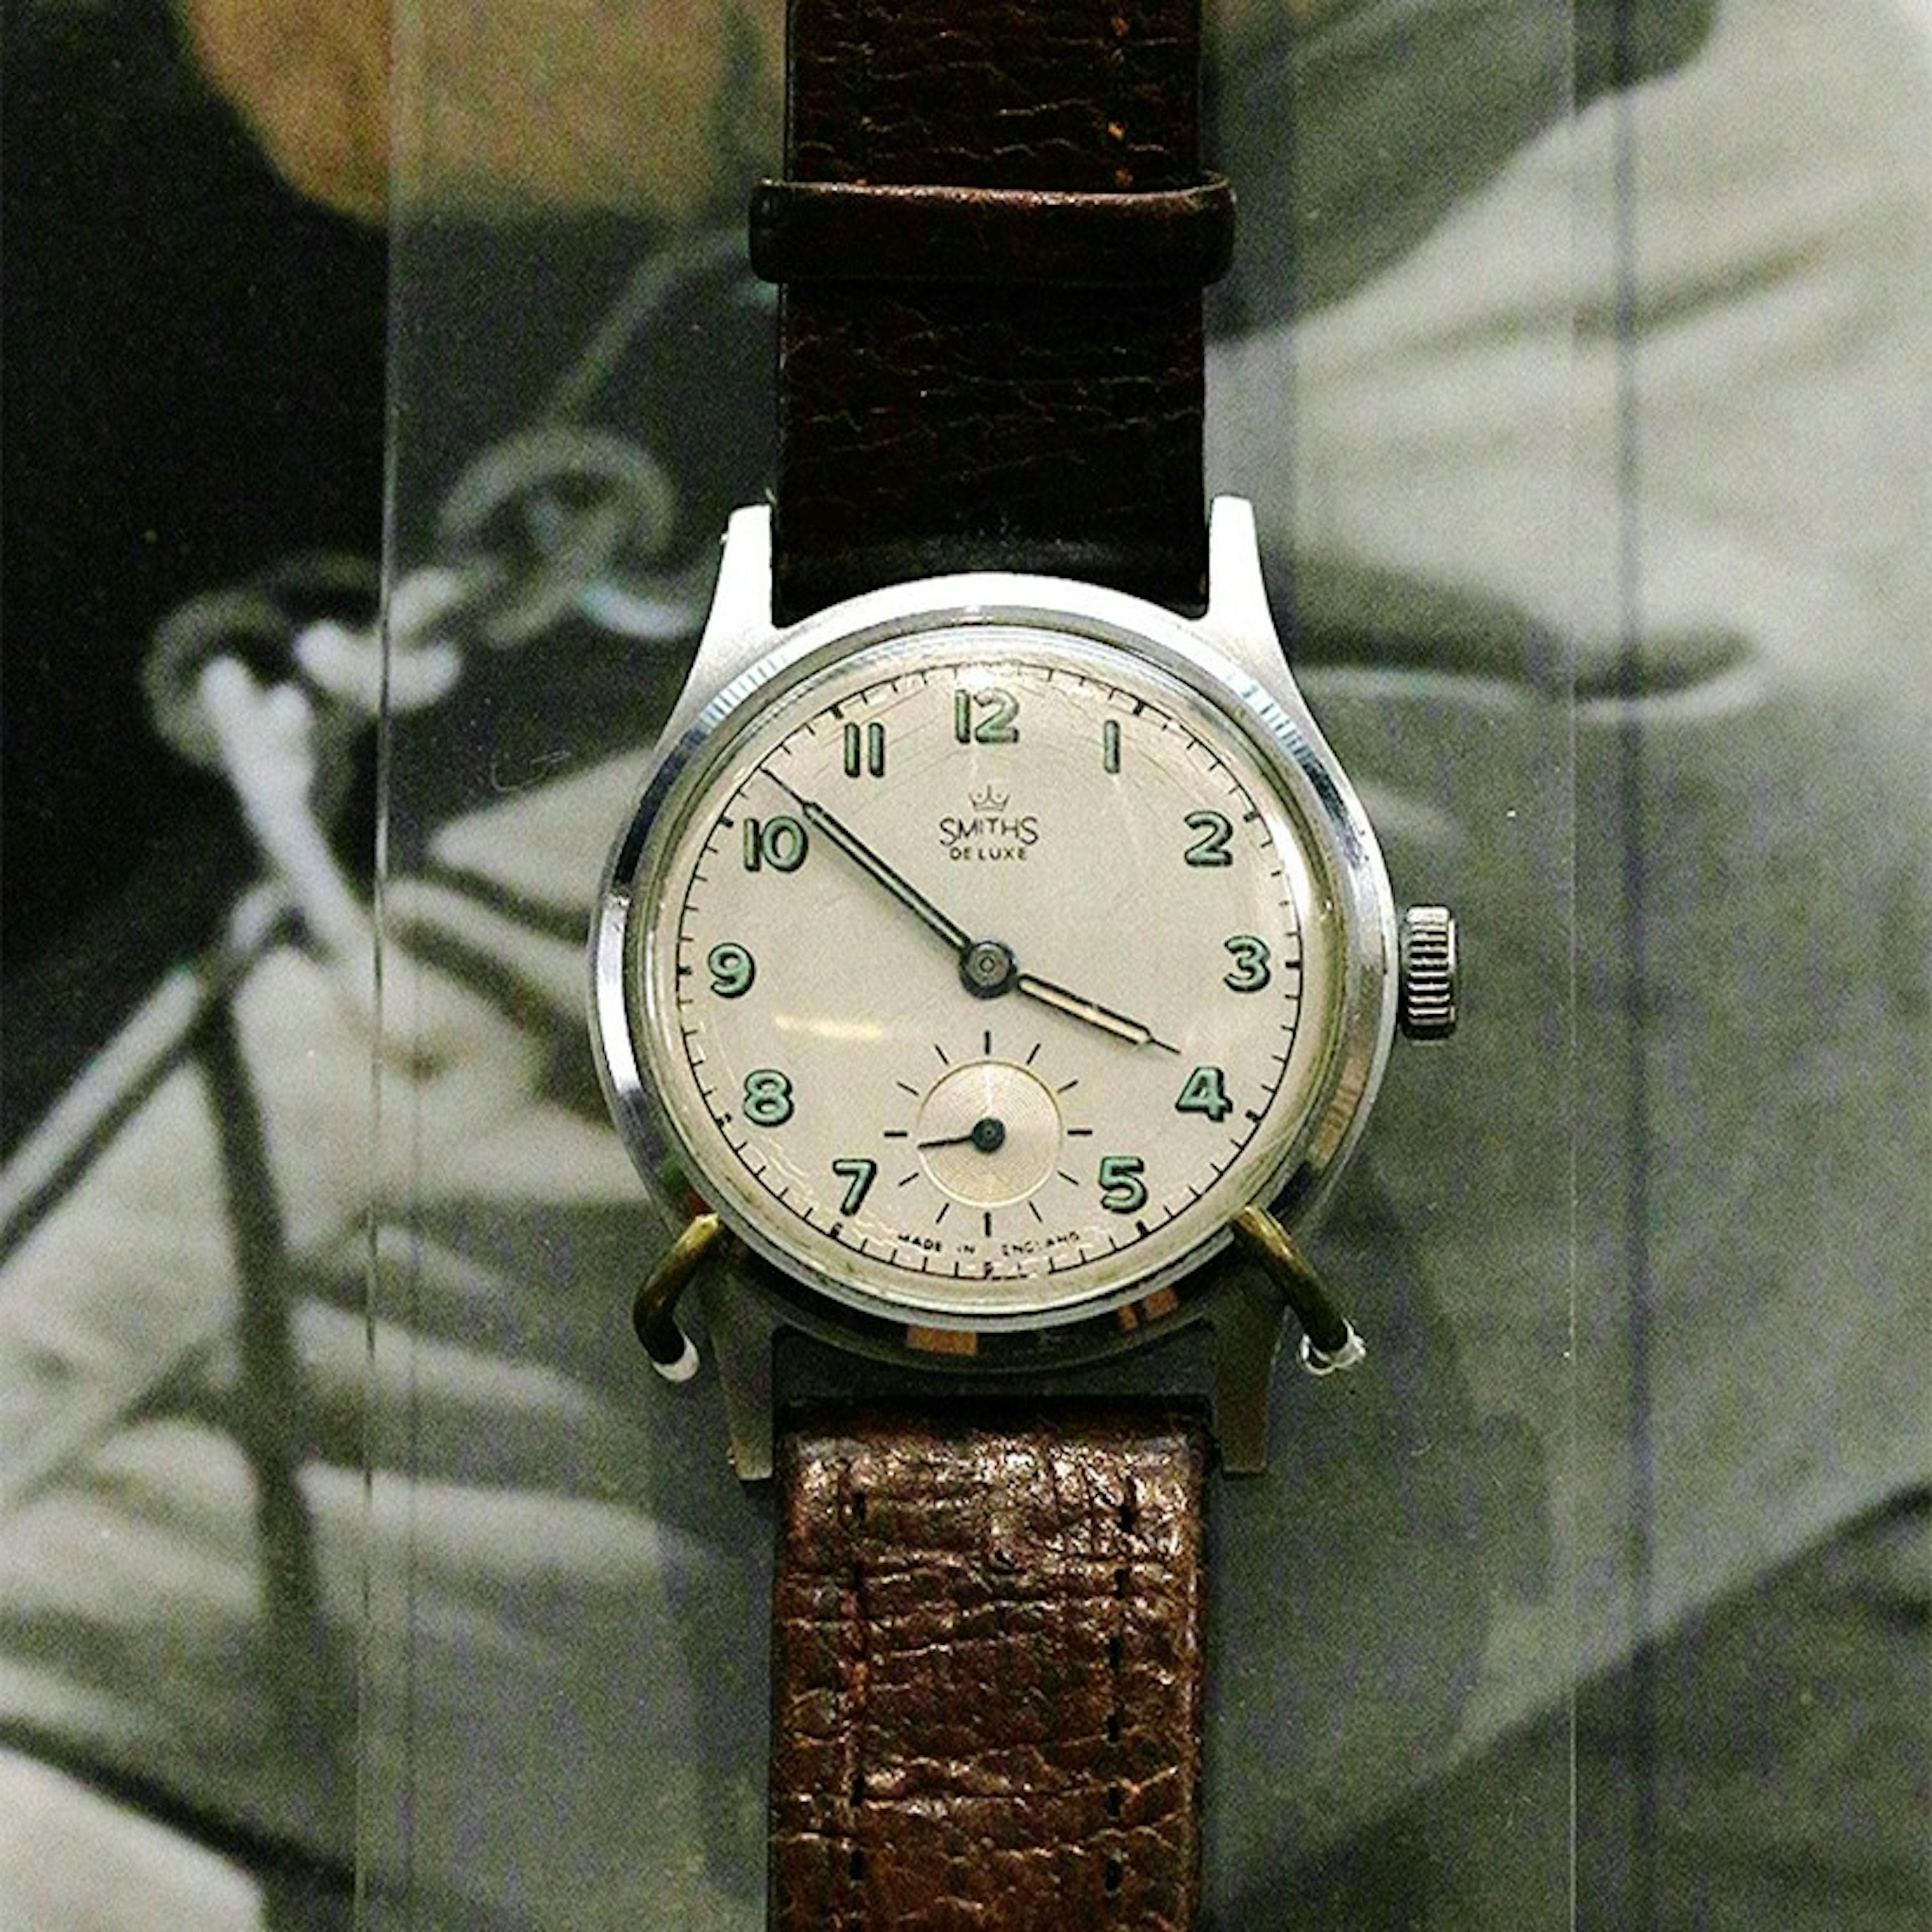 Smiths Deluxe A409 belonging to Edmund Hillary and now in the Science Museum in London